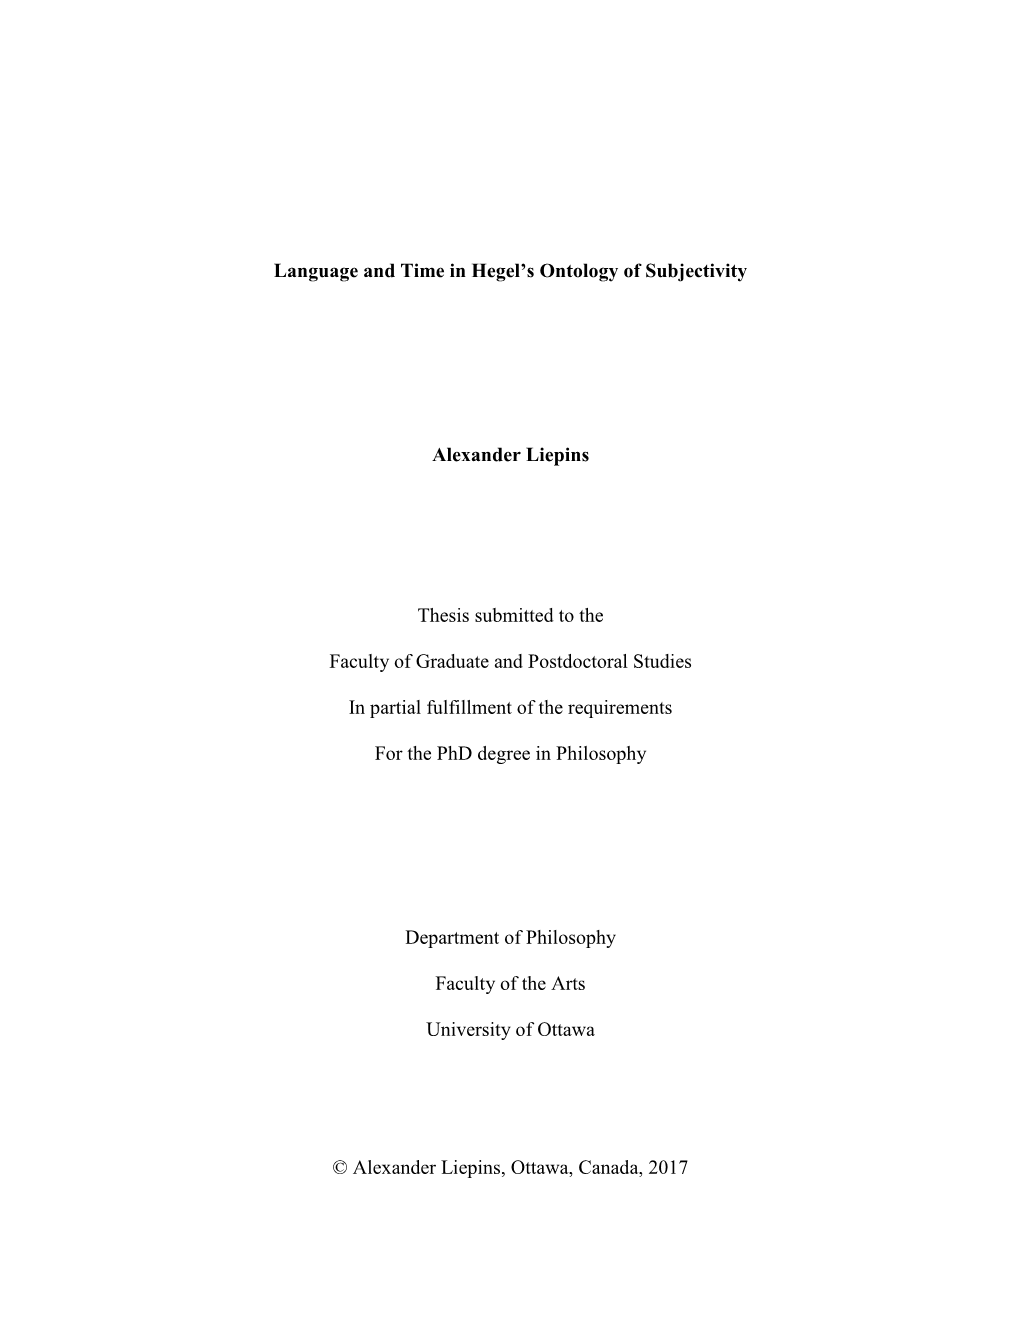 Language and Time in Hegel's Ontology of Subjectivity Alexander Liepins Thesis Submitted to the Faculty of Graduate and Postdo